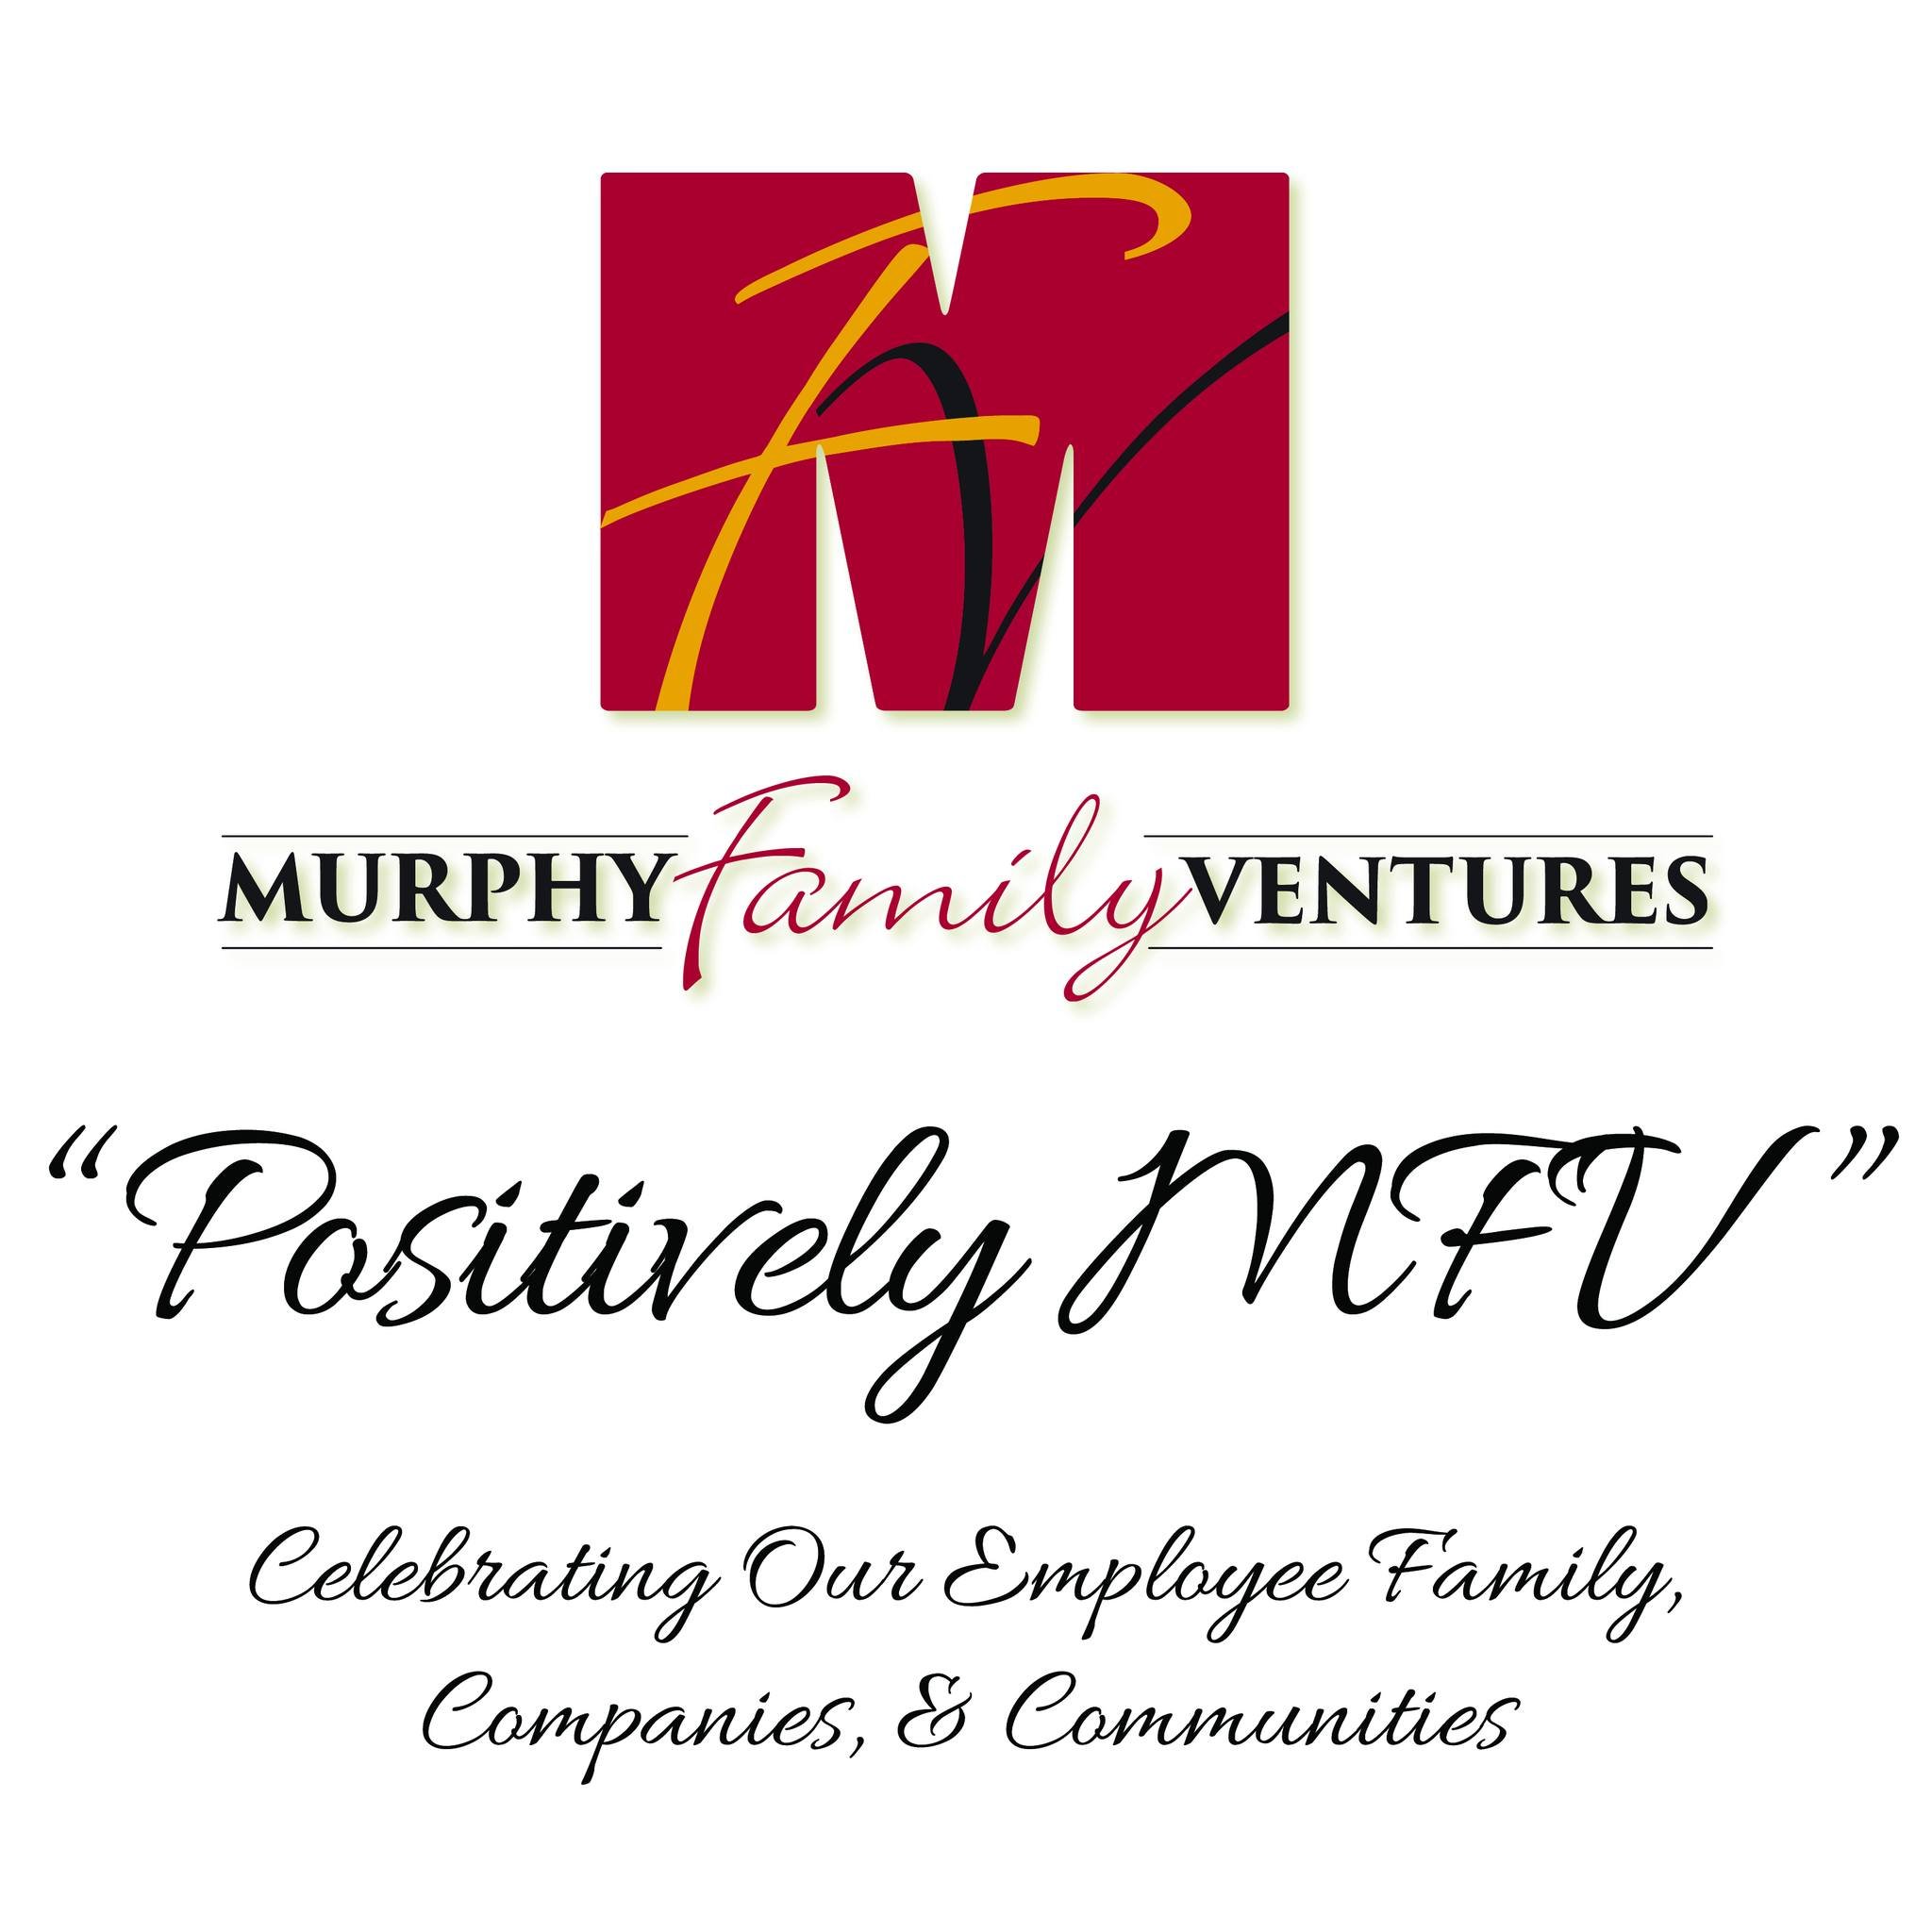 Check out April's edition of Positively MFV to see compliment box submissions, how we &quot;train the trainer&quot;, pictures from our recent high school career fair, and more. Visit the link in our bio to read more.